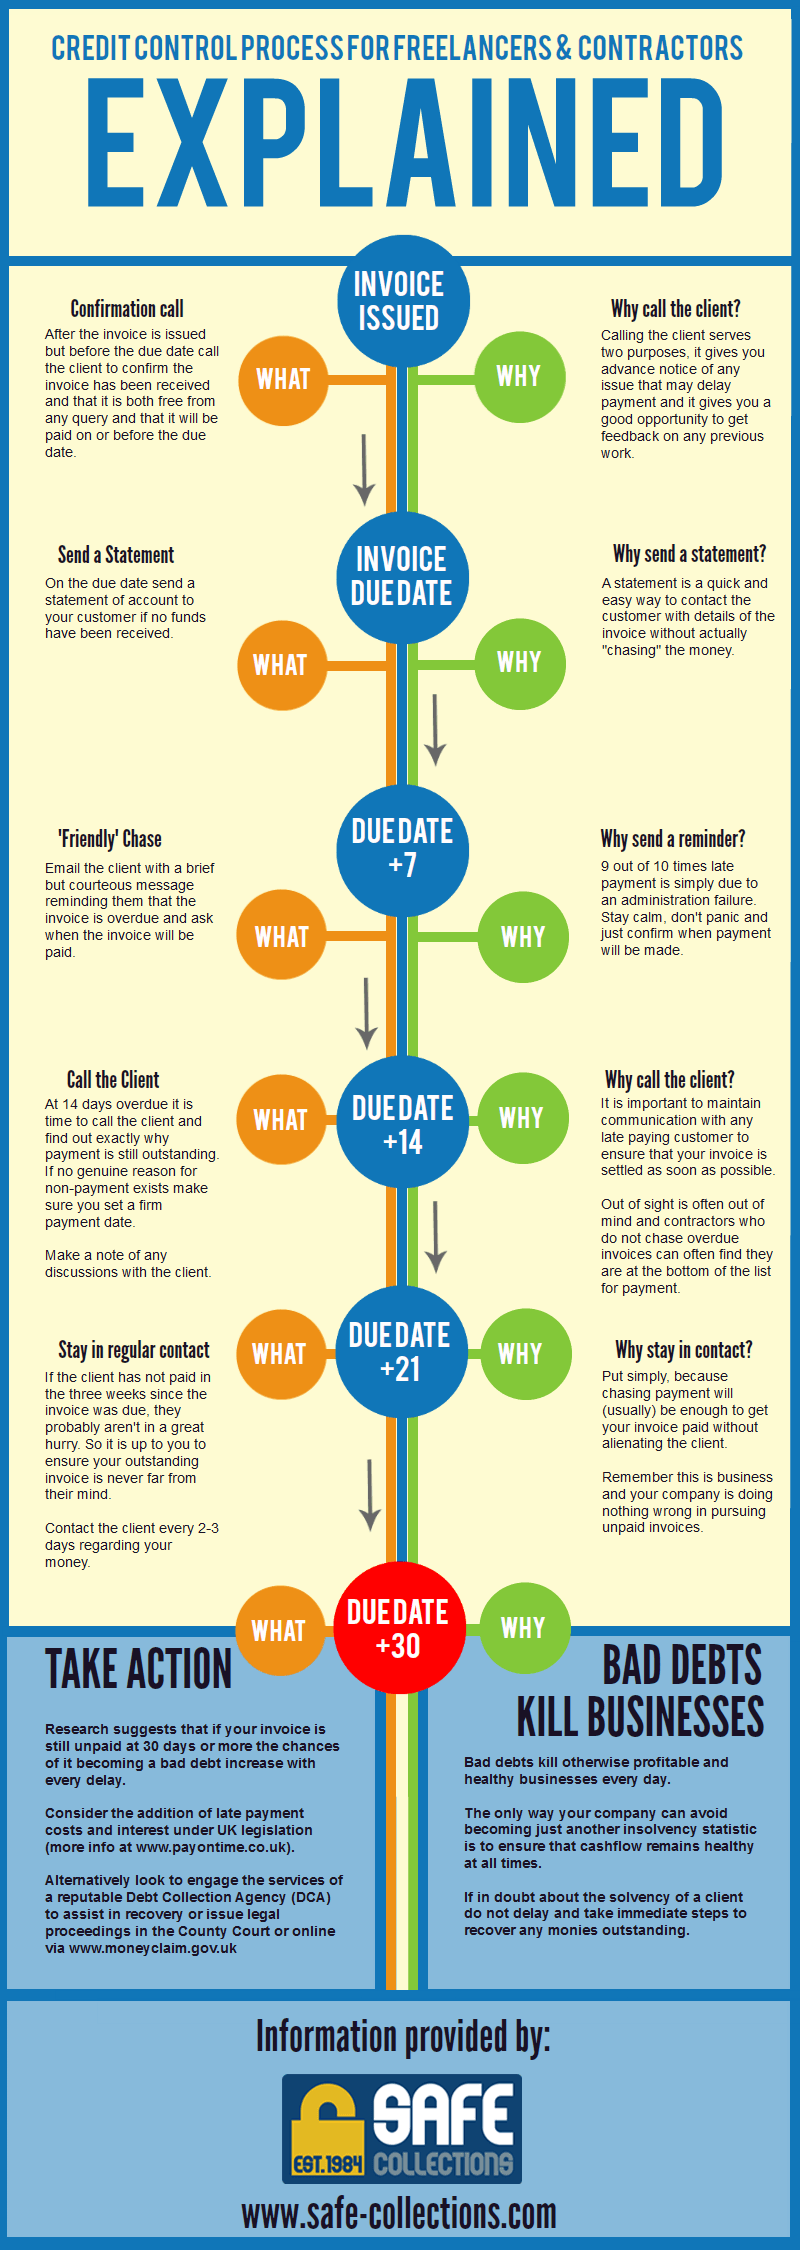 Credit Control infographic